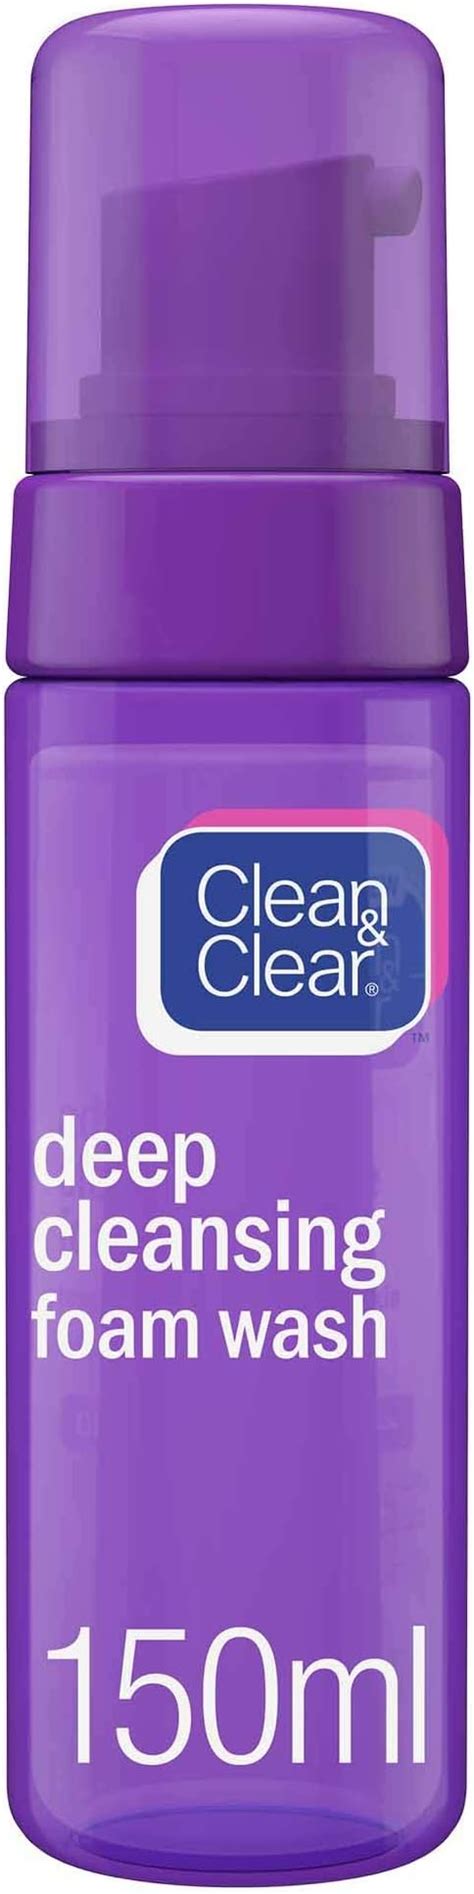 Clean And Clear Foam Wash Deep Cleansing 150ml Buy Online At Best